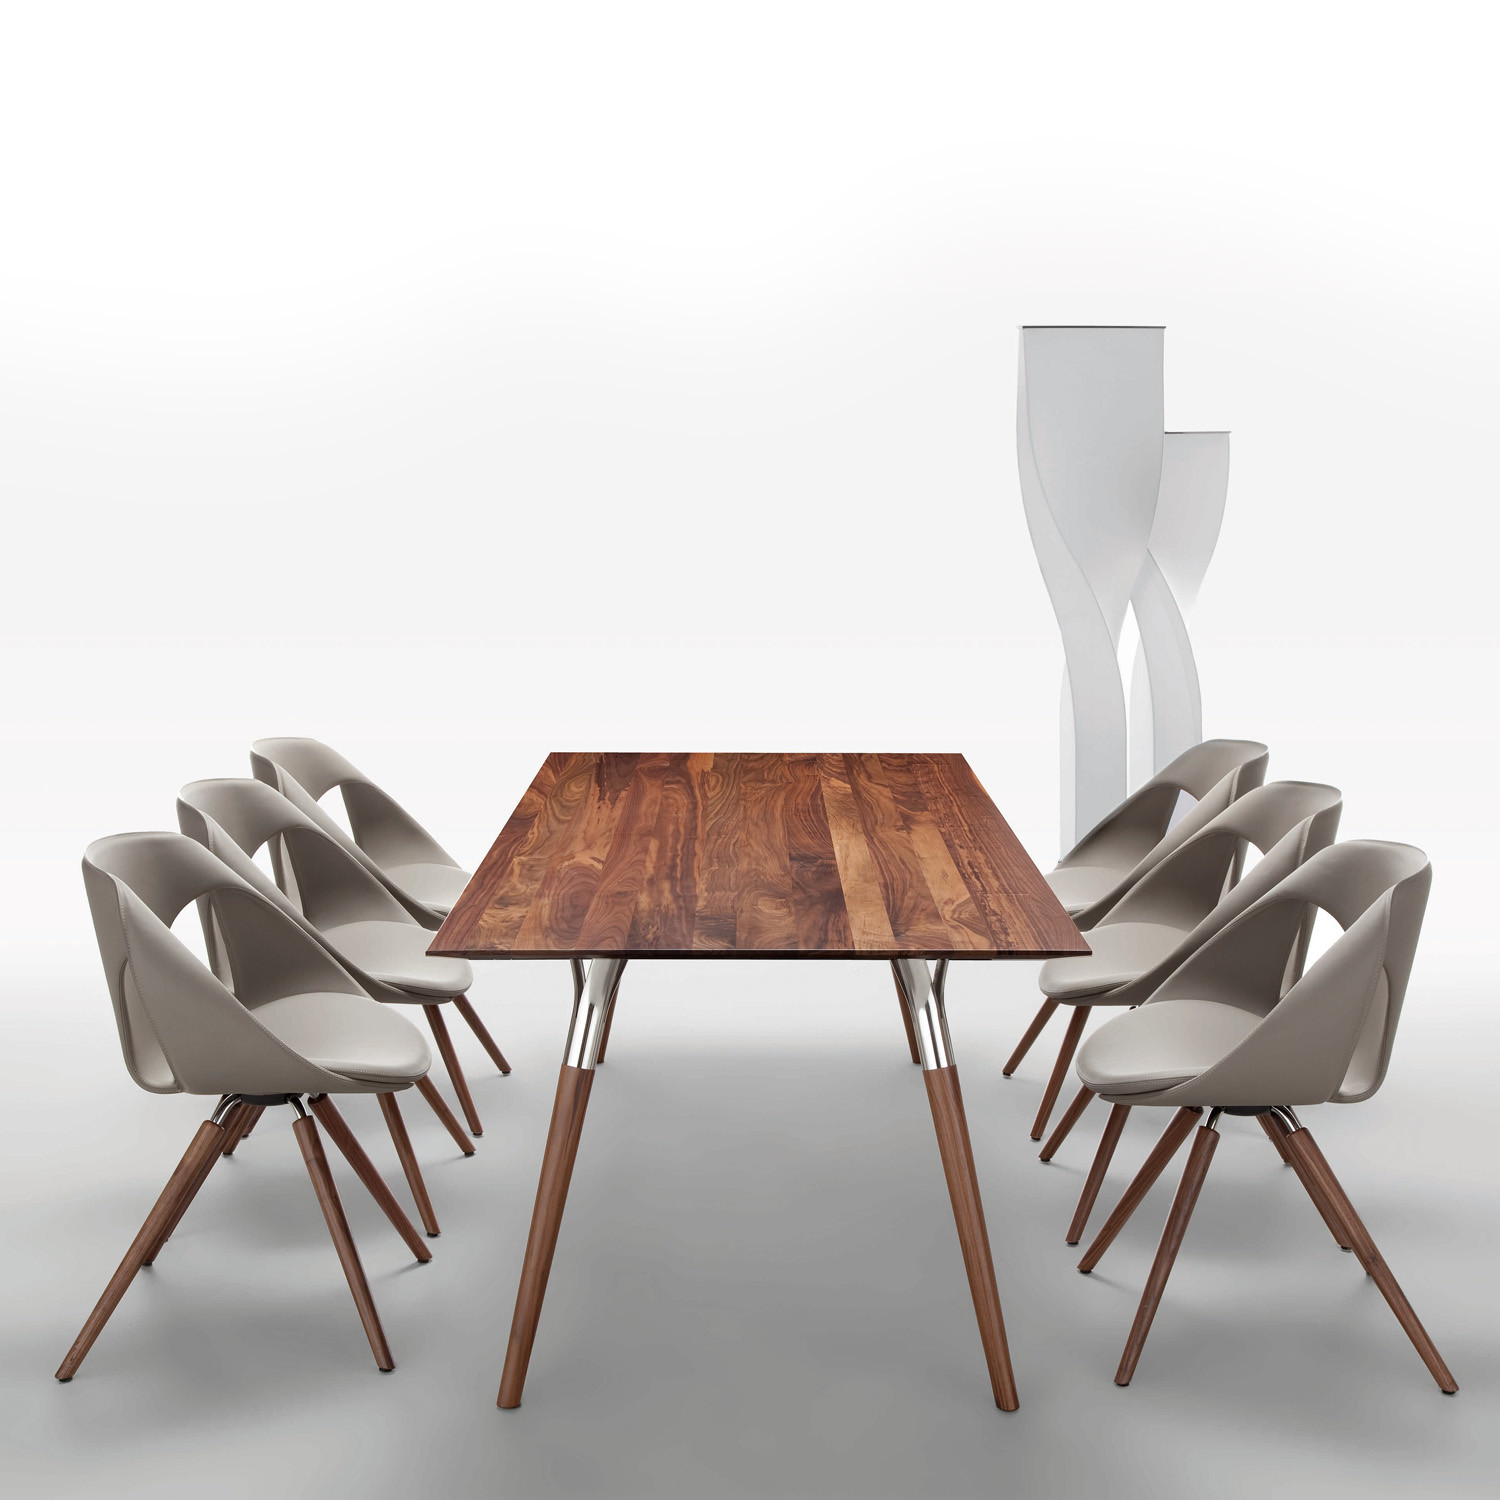 Salt and Pepper Meeting Table